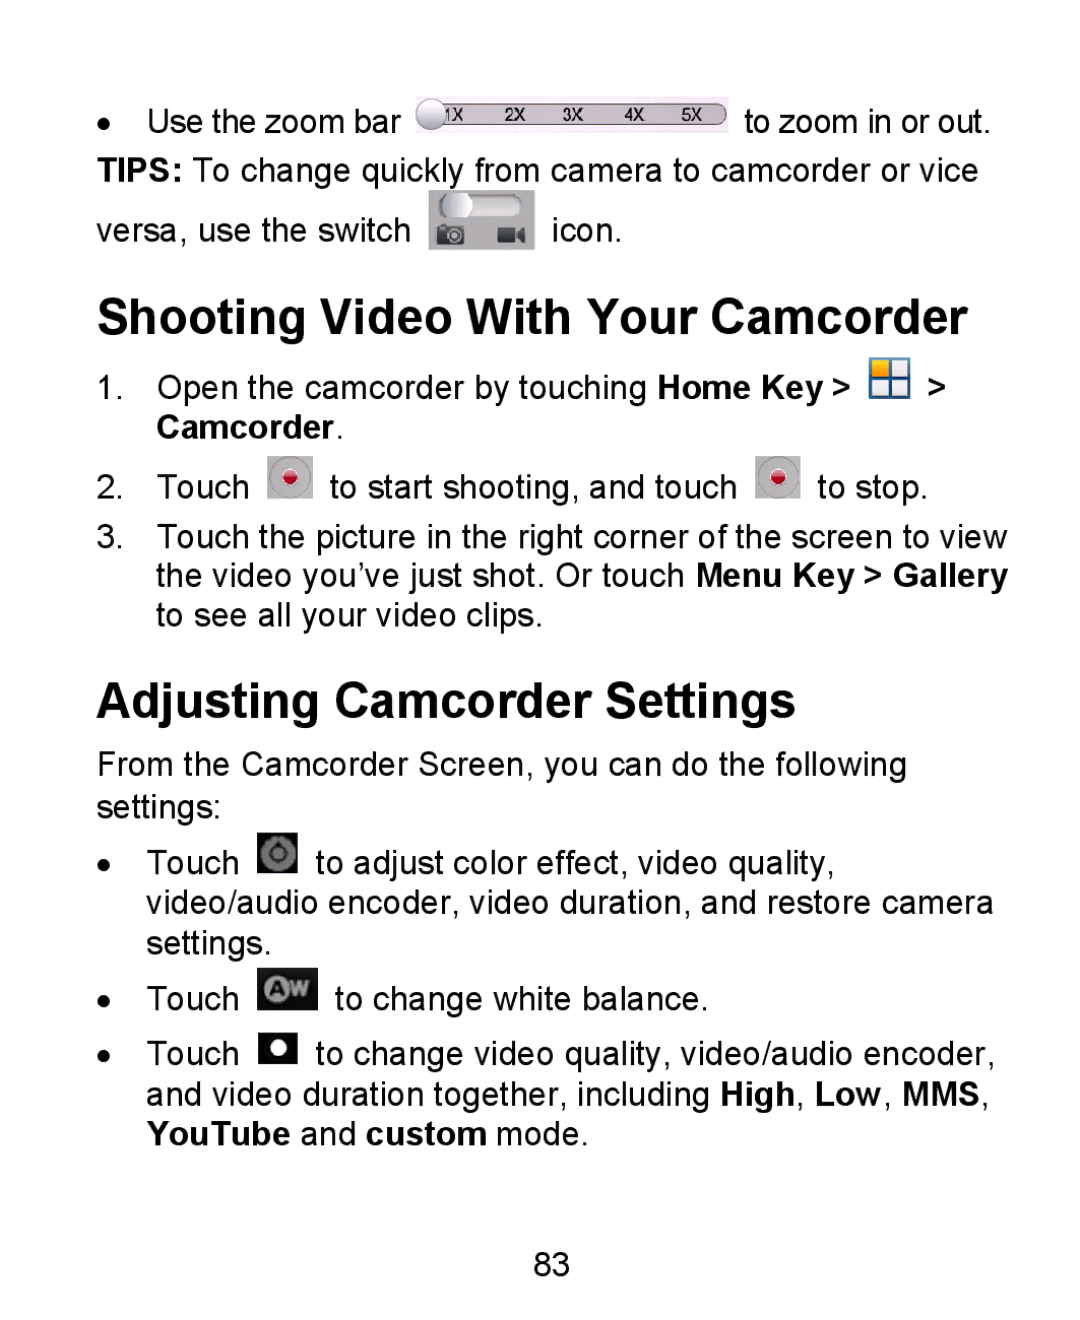 ZTE KIS user manual Shooting Video With Your Camcorder, Adjusting Camcorder Settings 